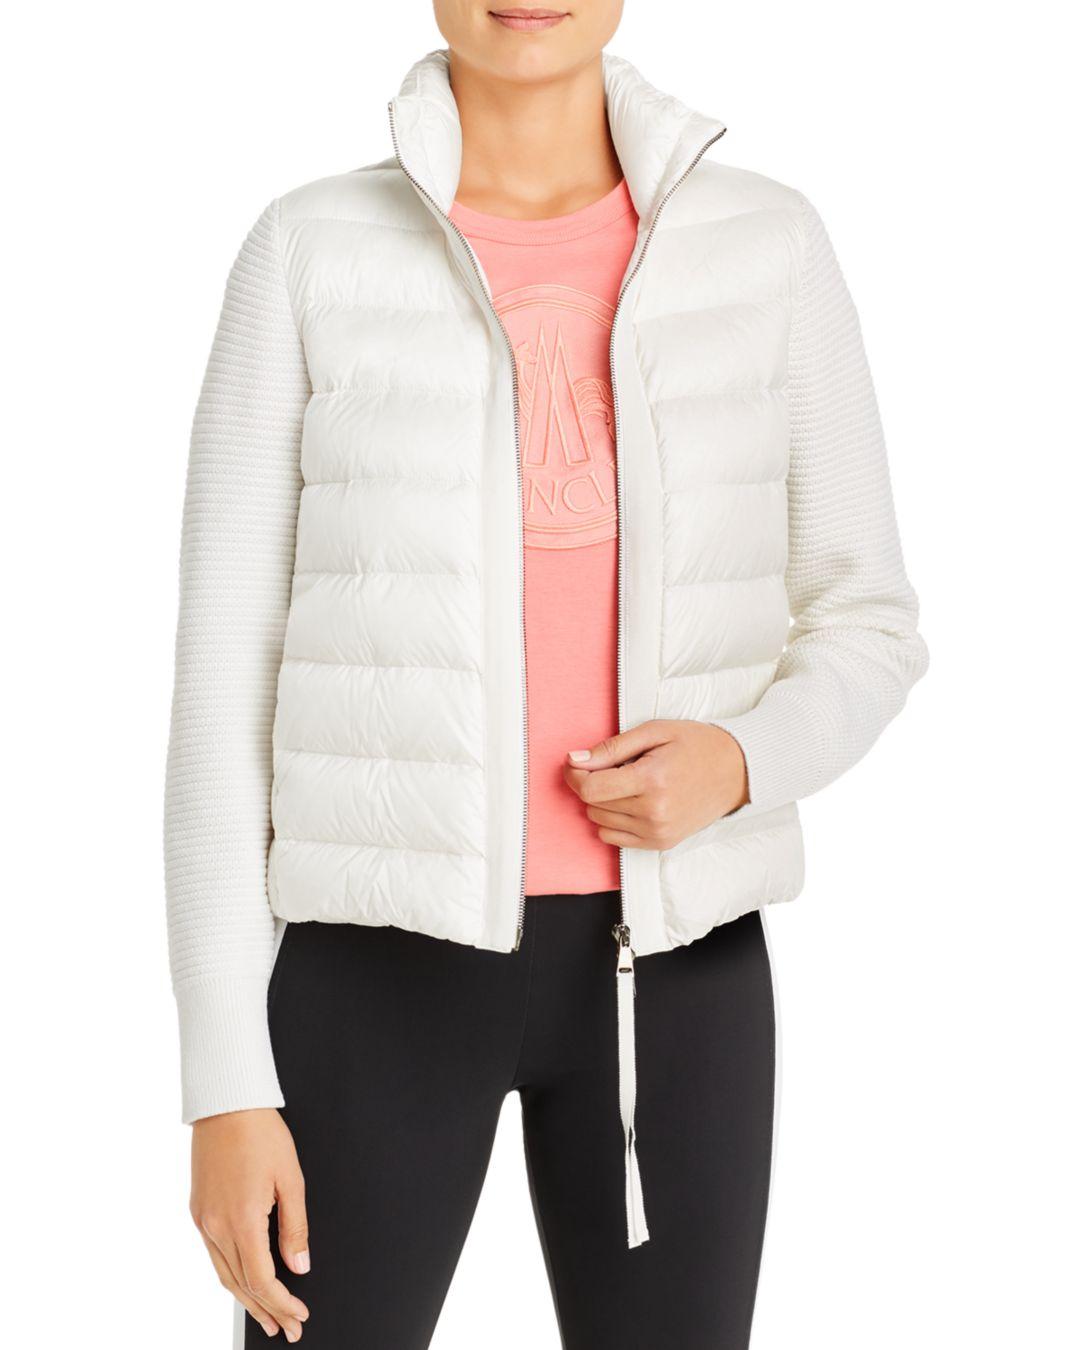 Moncler Quilted Down & Knit Cardigan in White - Lyst